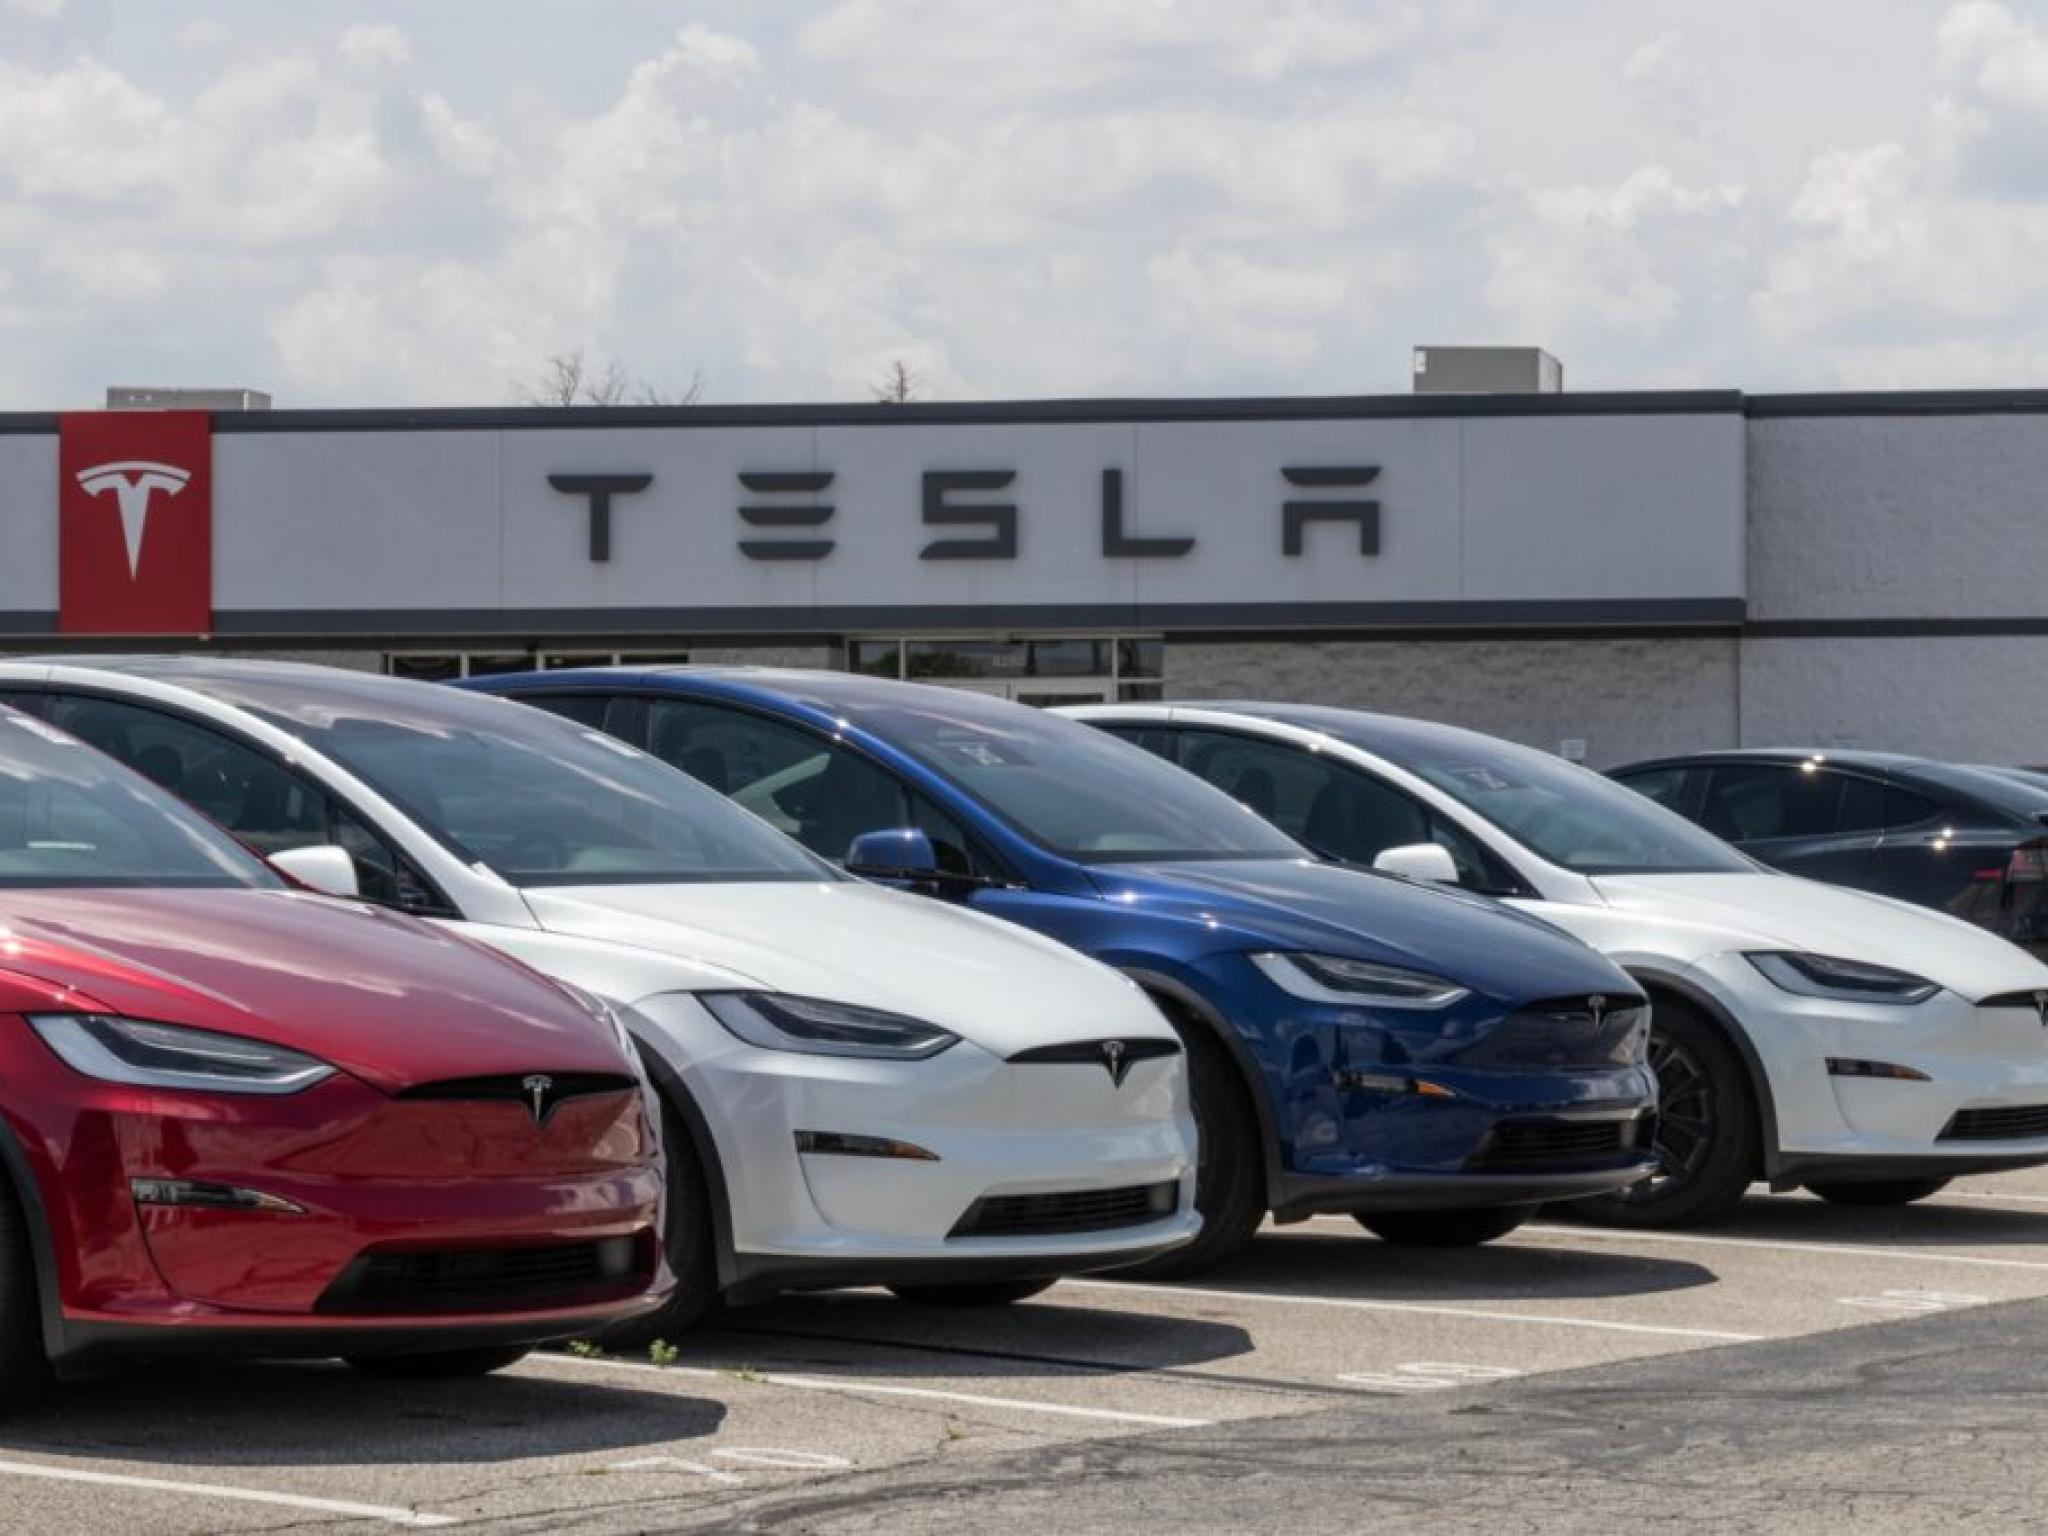  tesla-set-to-boost-revenue-and-margins-with-china-breakthrough-analyst-predicts 